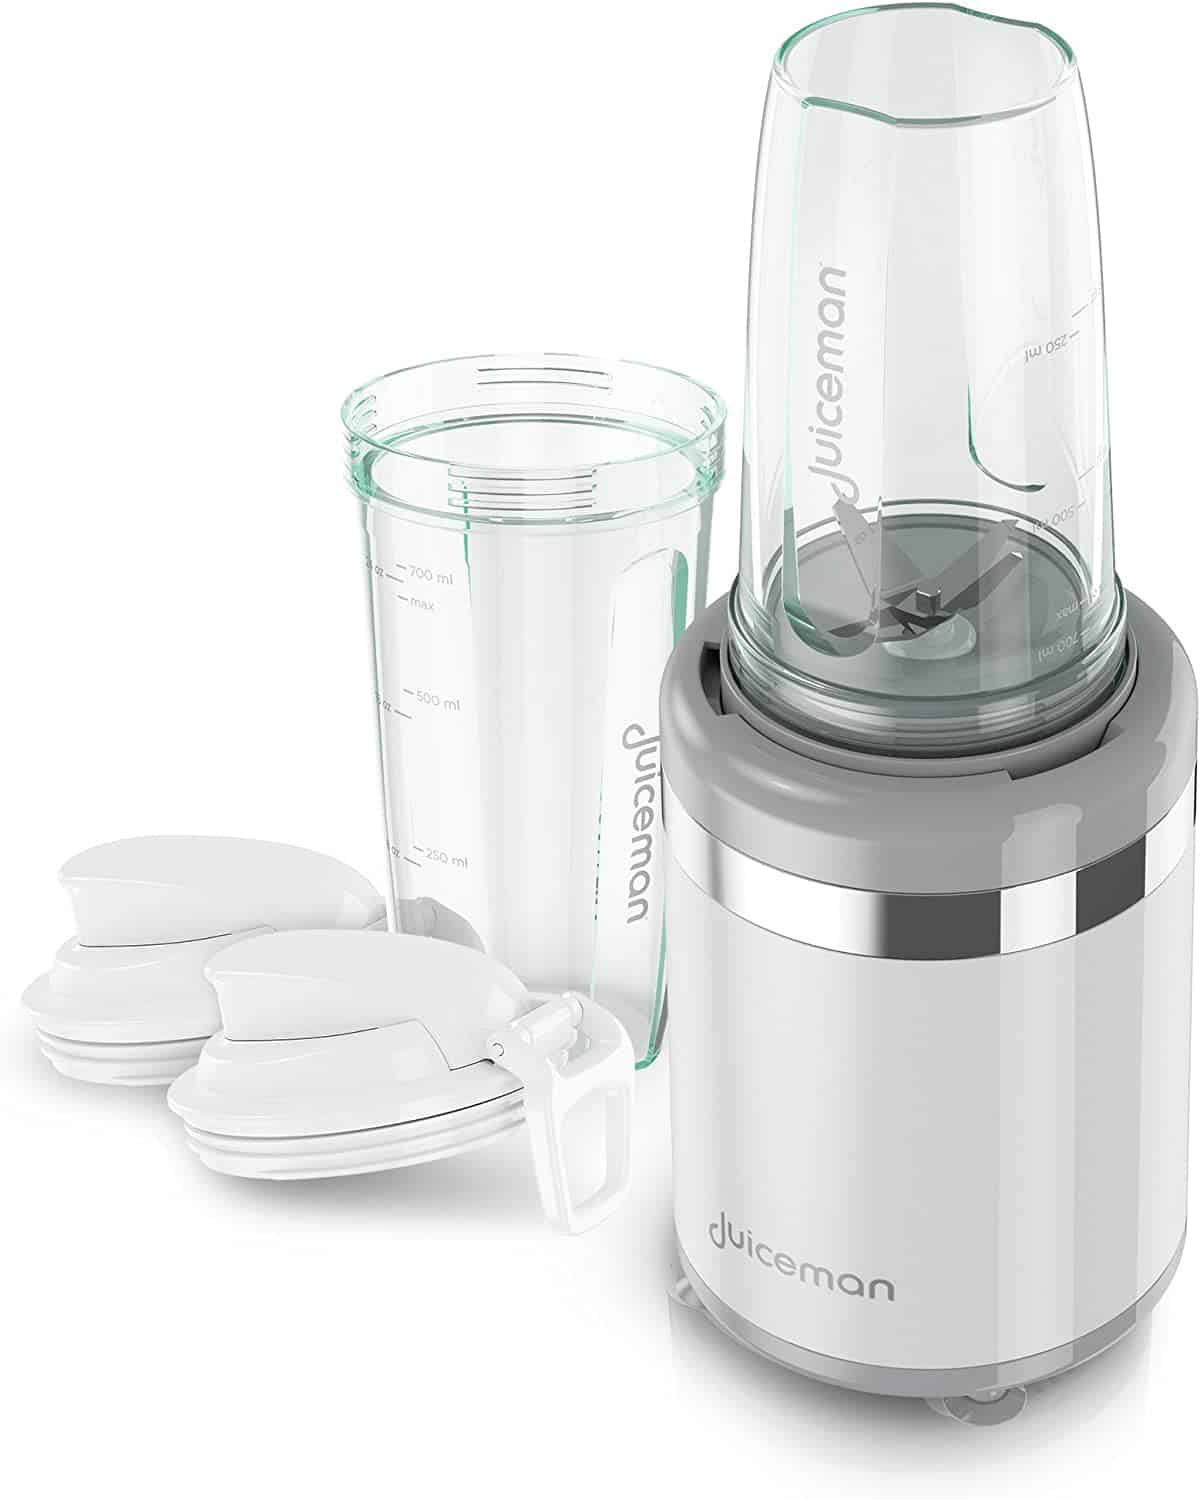 Juiceman Express Whole Juicer for Fruits and Vegetables